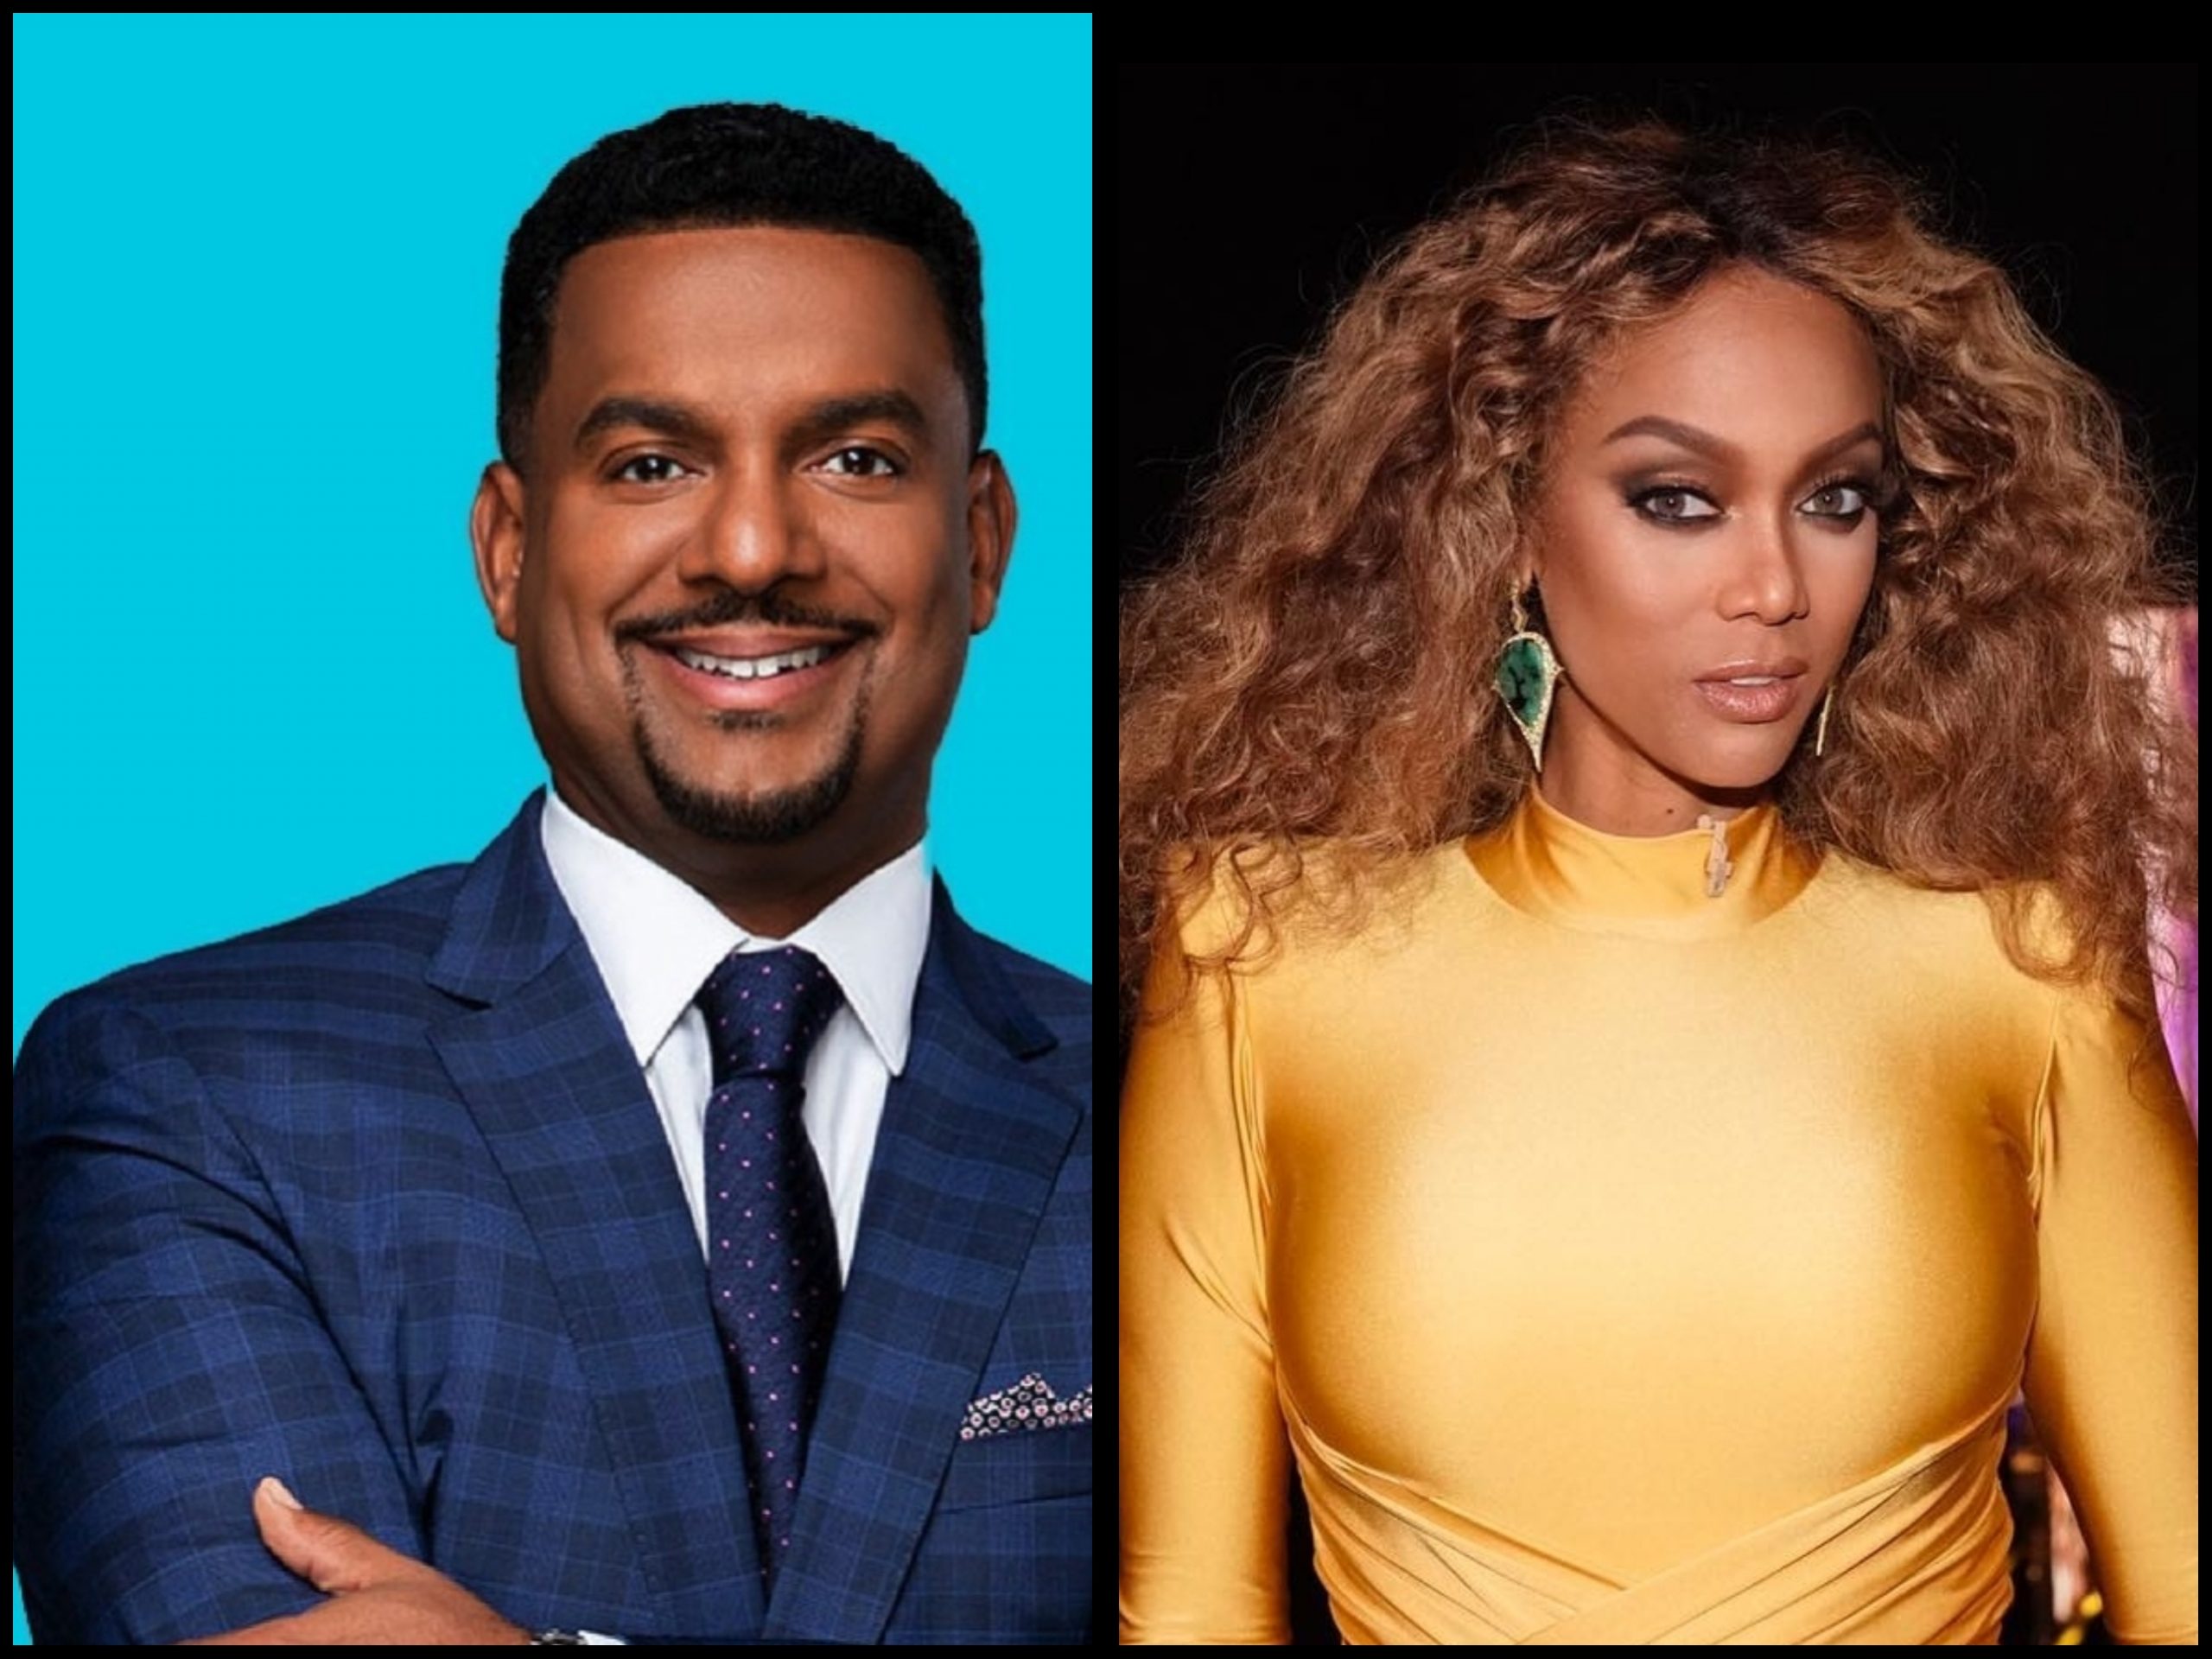 Alfonso Ribeiro Set To Co-Host “Dancing With The Stars” With Tyra Banks